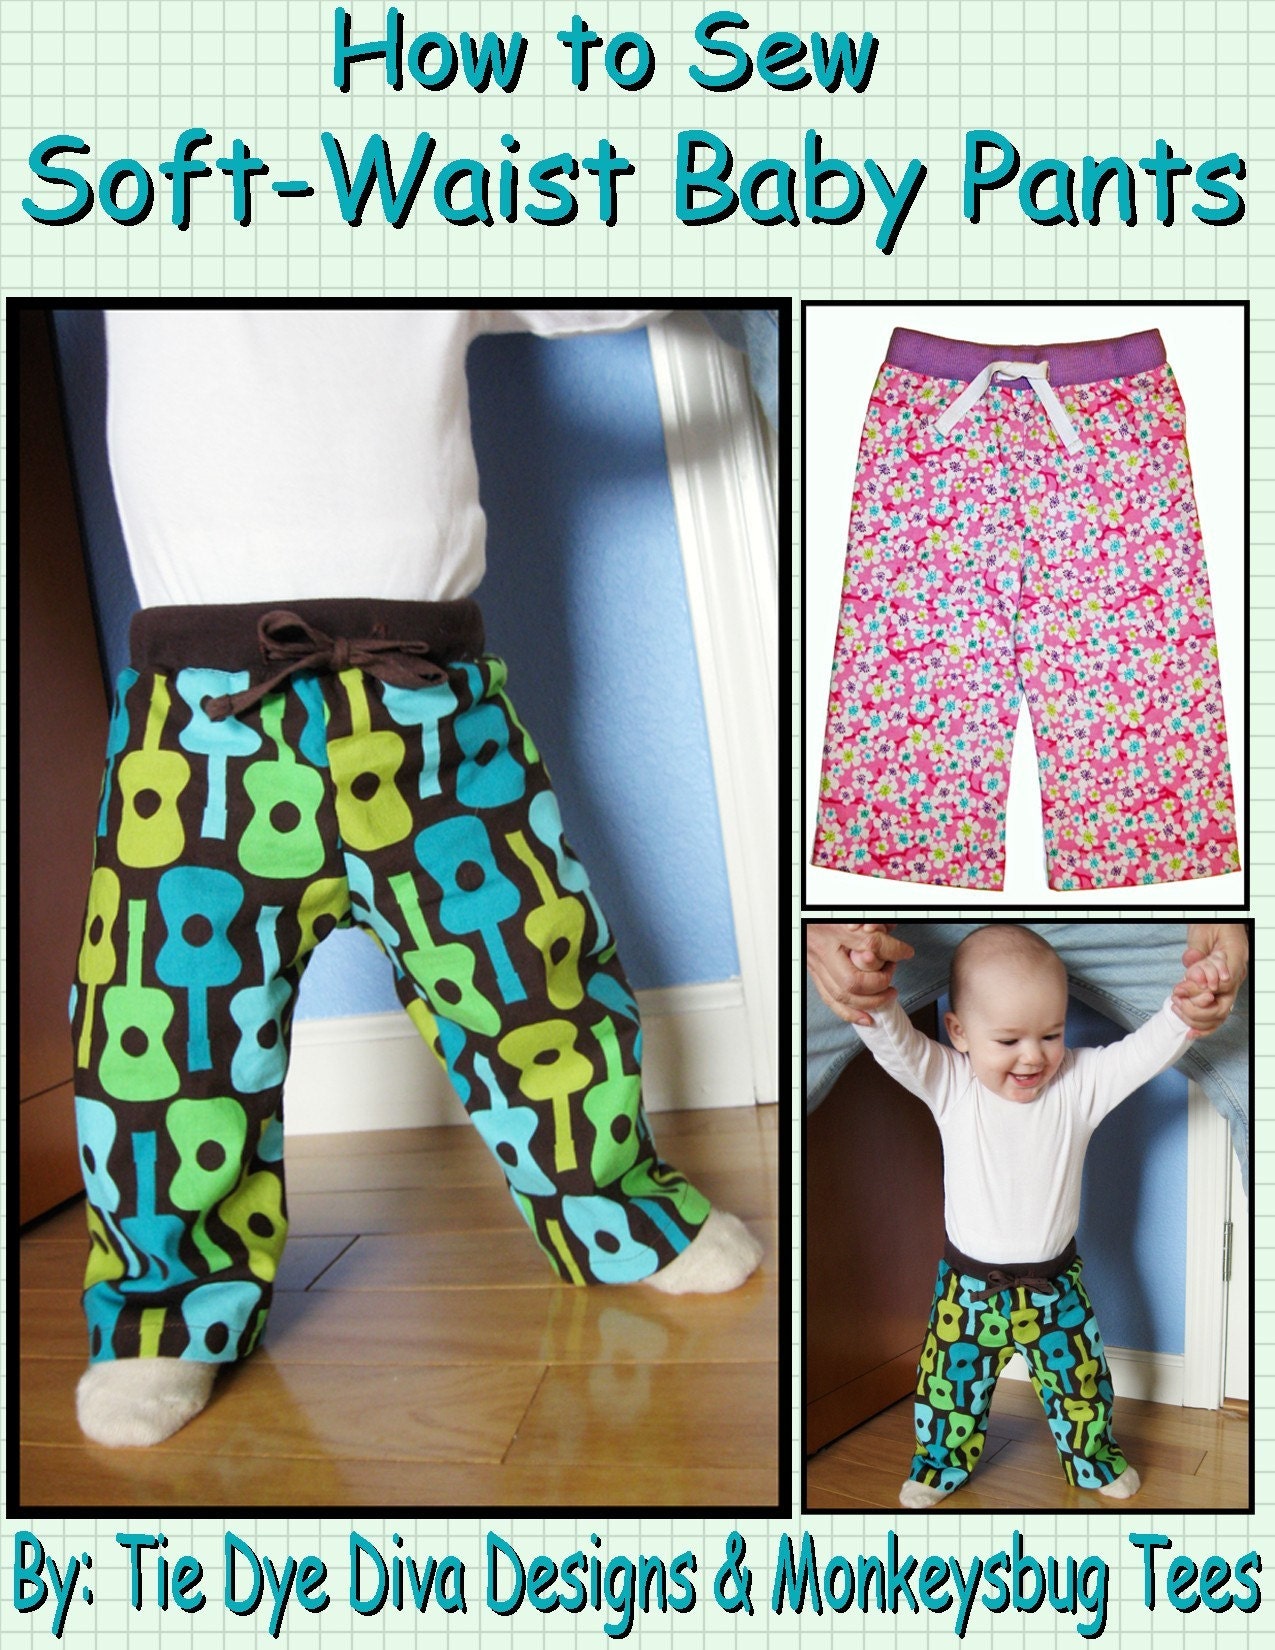 How to Sew SOFT WAIST BABY PANTS for infants and toddlers PDF